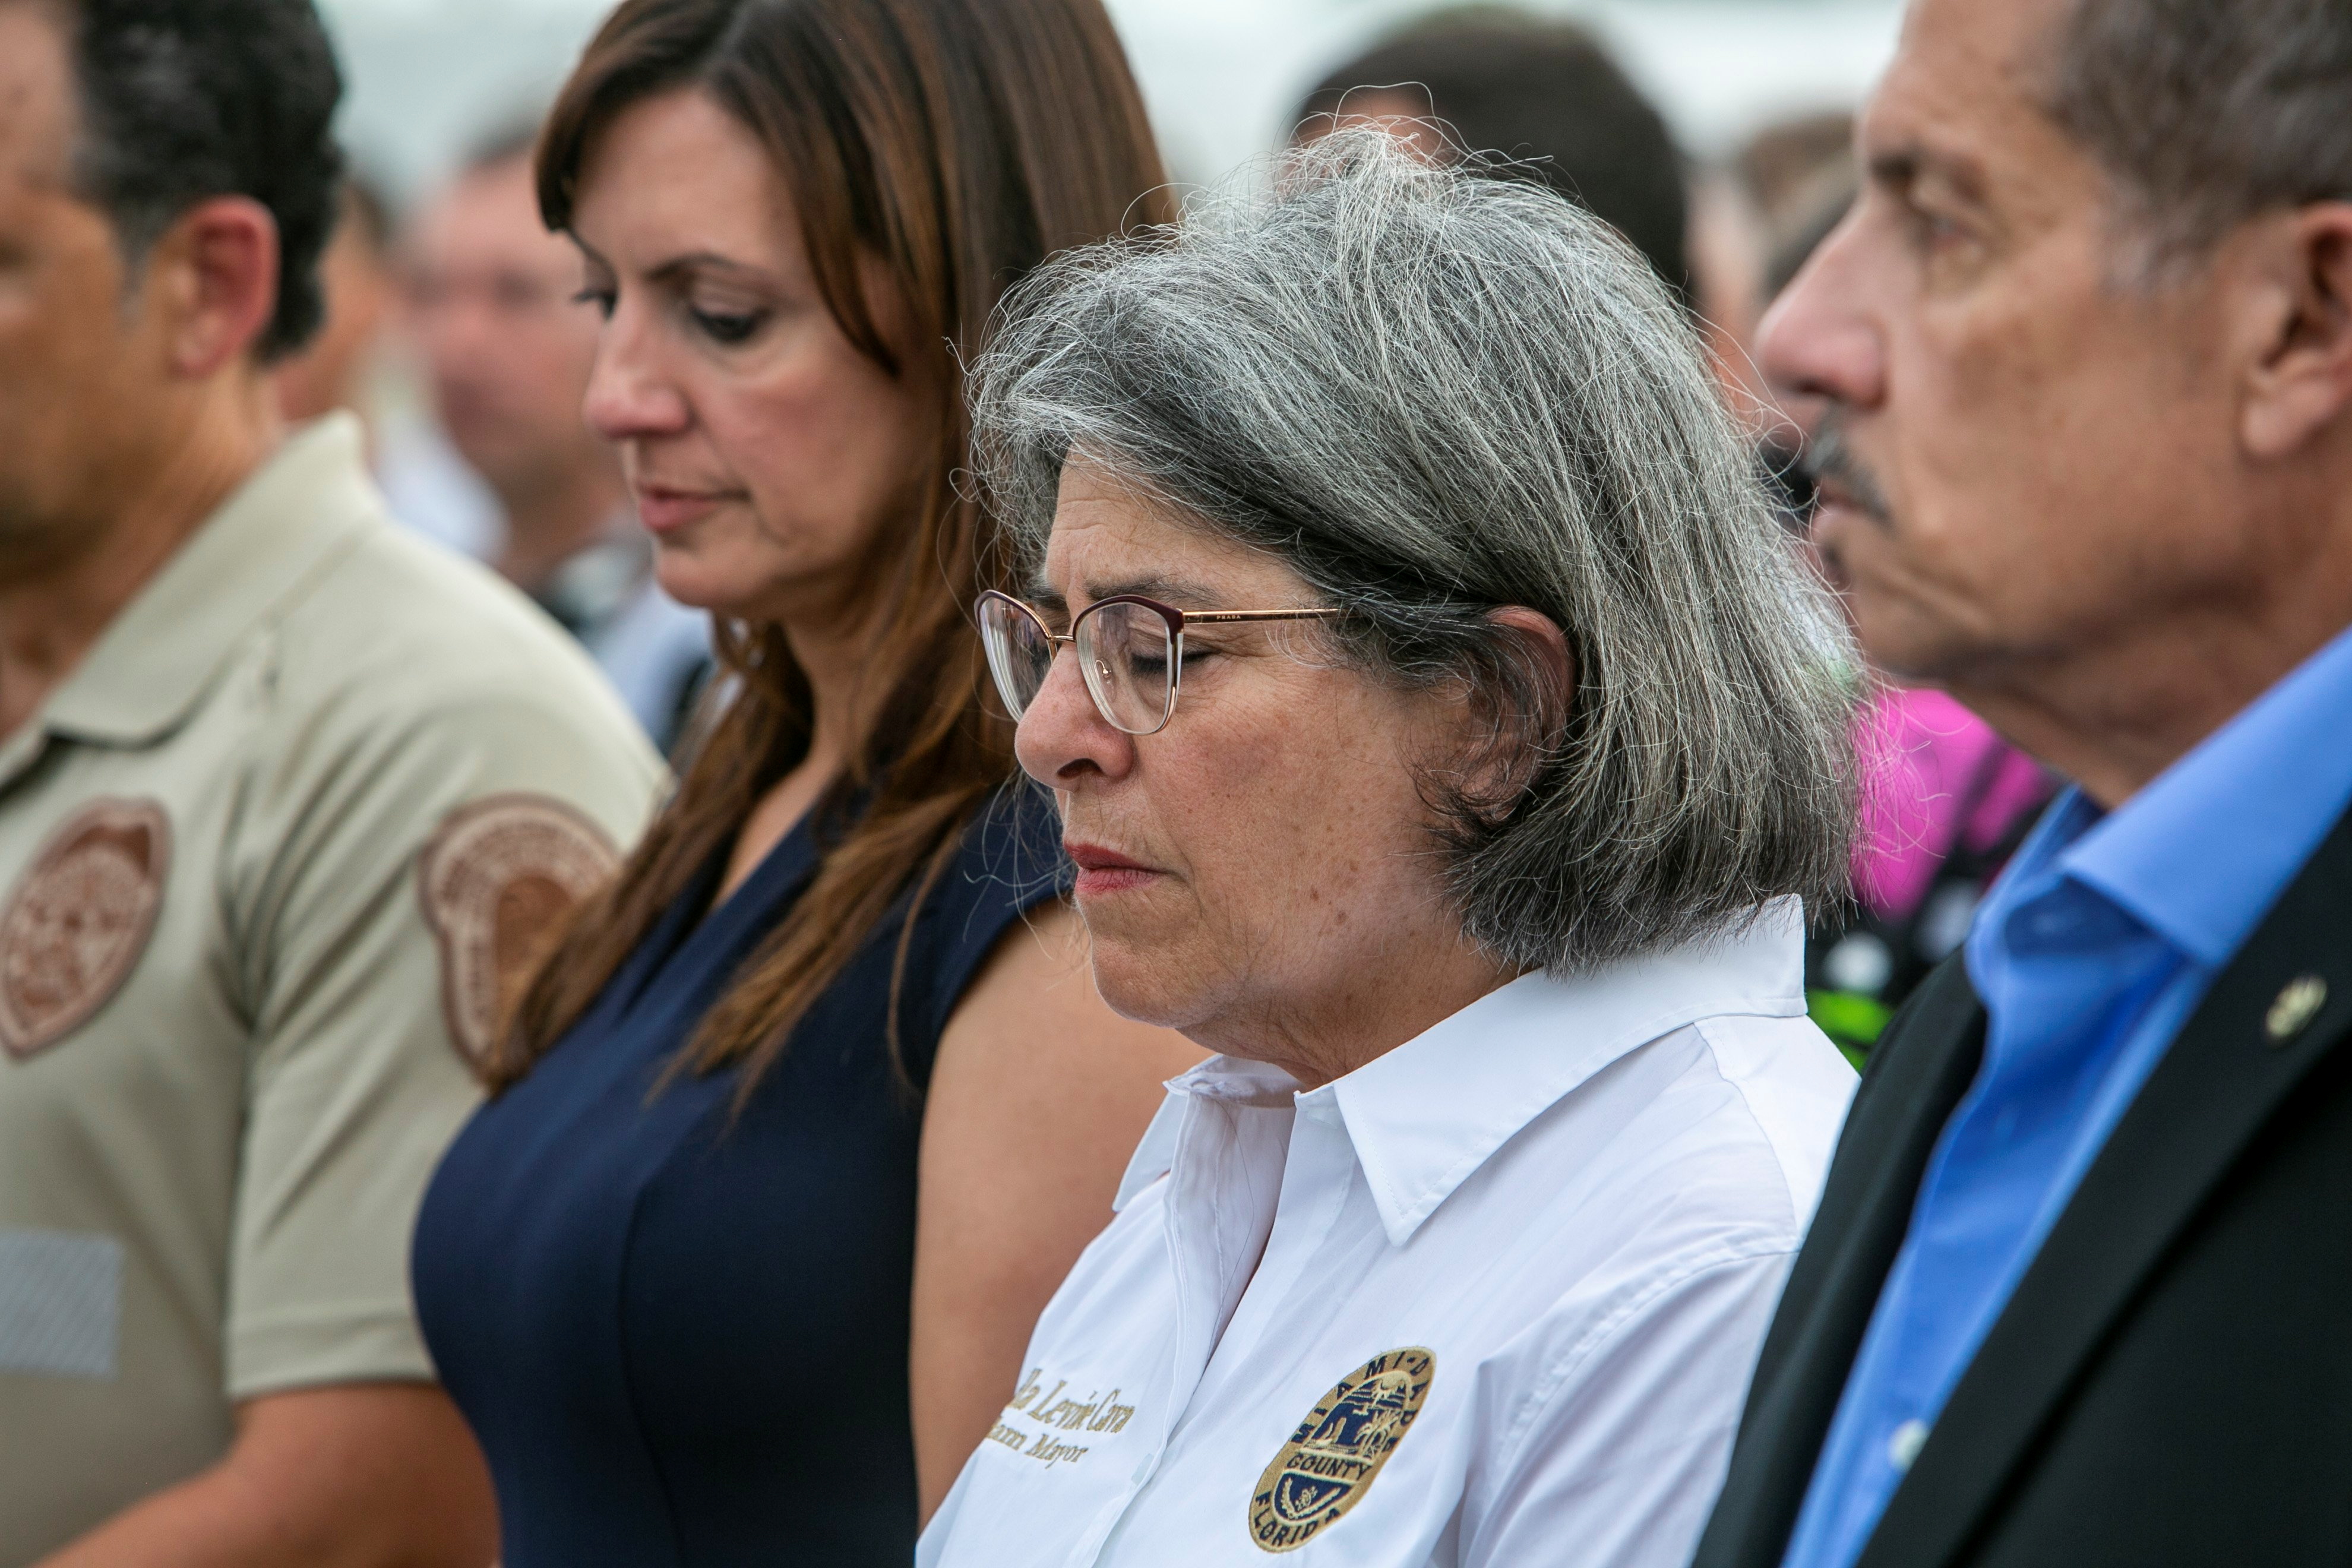 Miami-Dade County Mayor, Daniella Levine Cava  (center) prays along with other officials in front of the rubble that once was Champlain Towers South during a prayer ceremony and a moment of silence in Surfside, Florida, U.S. July 7, 2021. Jose A Iglesias/Pool via REUTERS